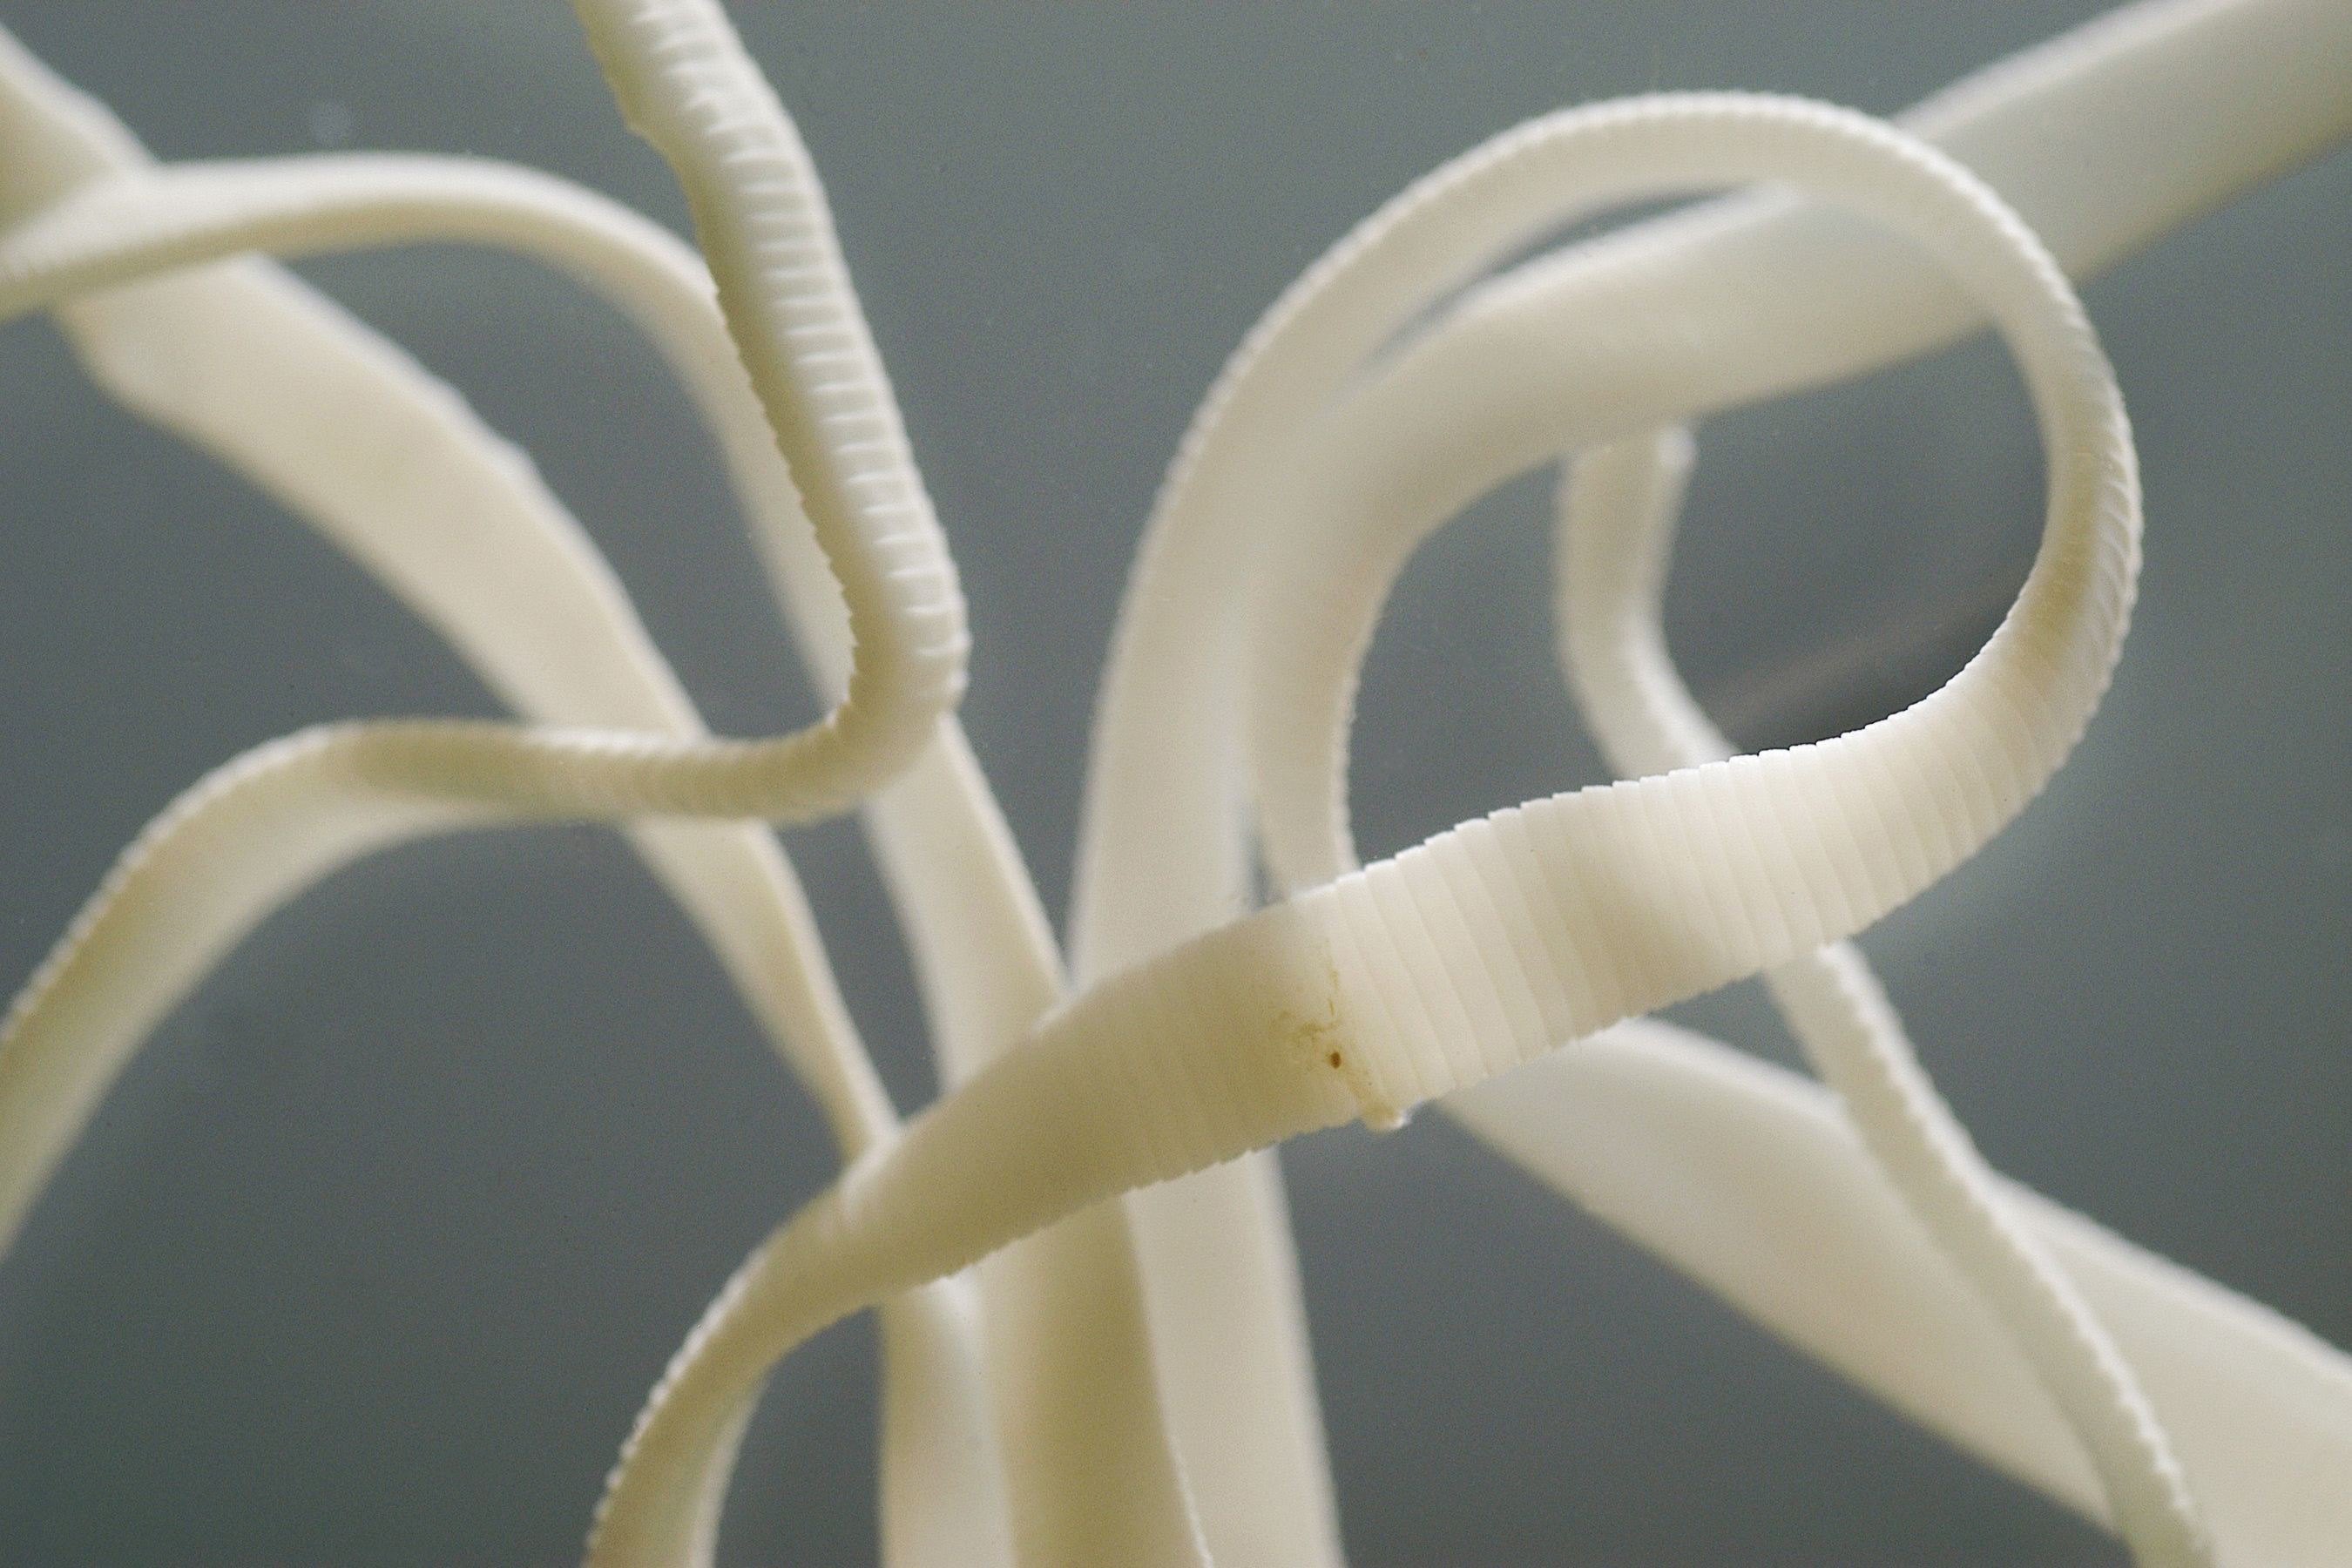 caption visible in this 1 1 2 ratio view of a preserved tapeworm